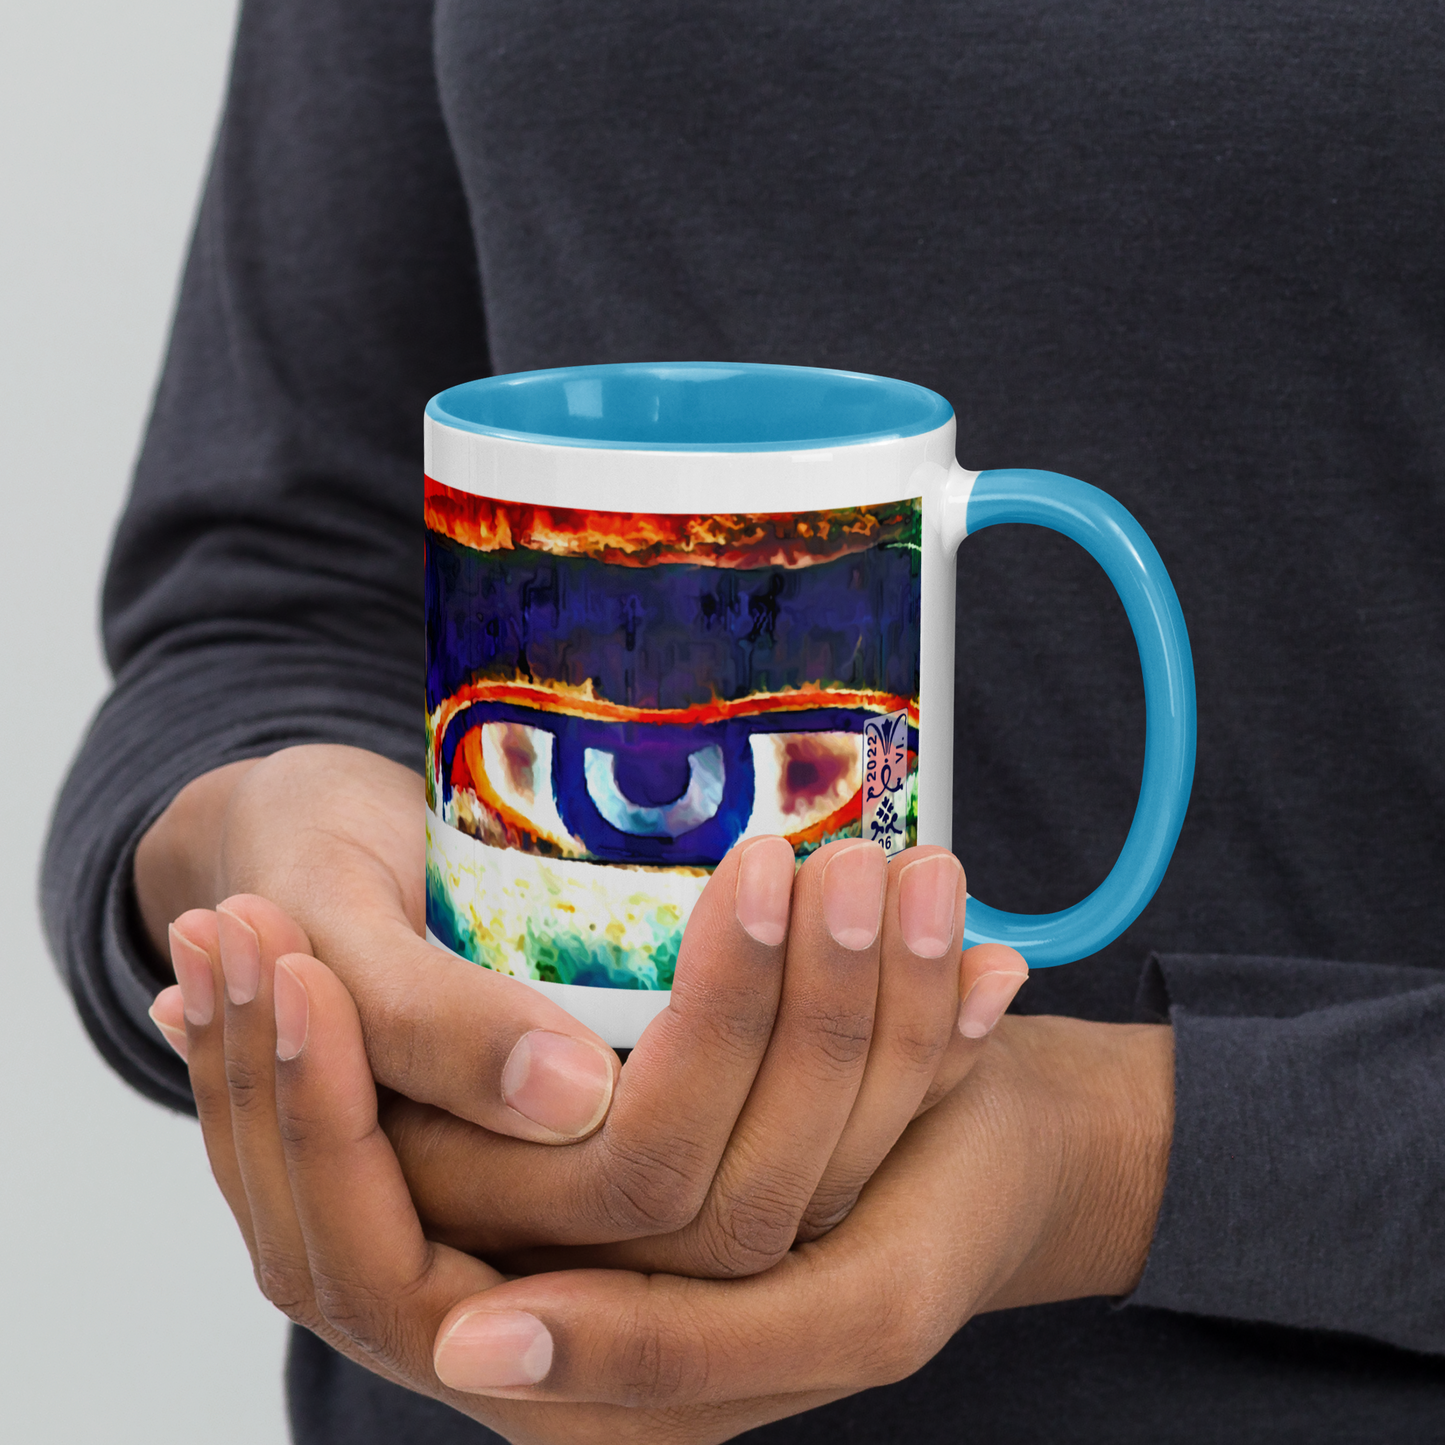 Ceramic Mug with Color Inside 'Just Seeing 3/5' artist-authorised edition of original artwork by Enmempin N. Midelobo